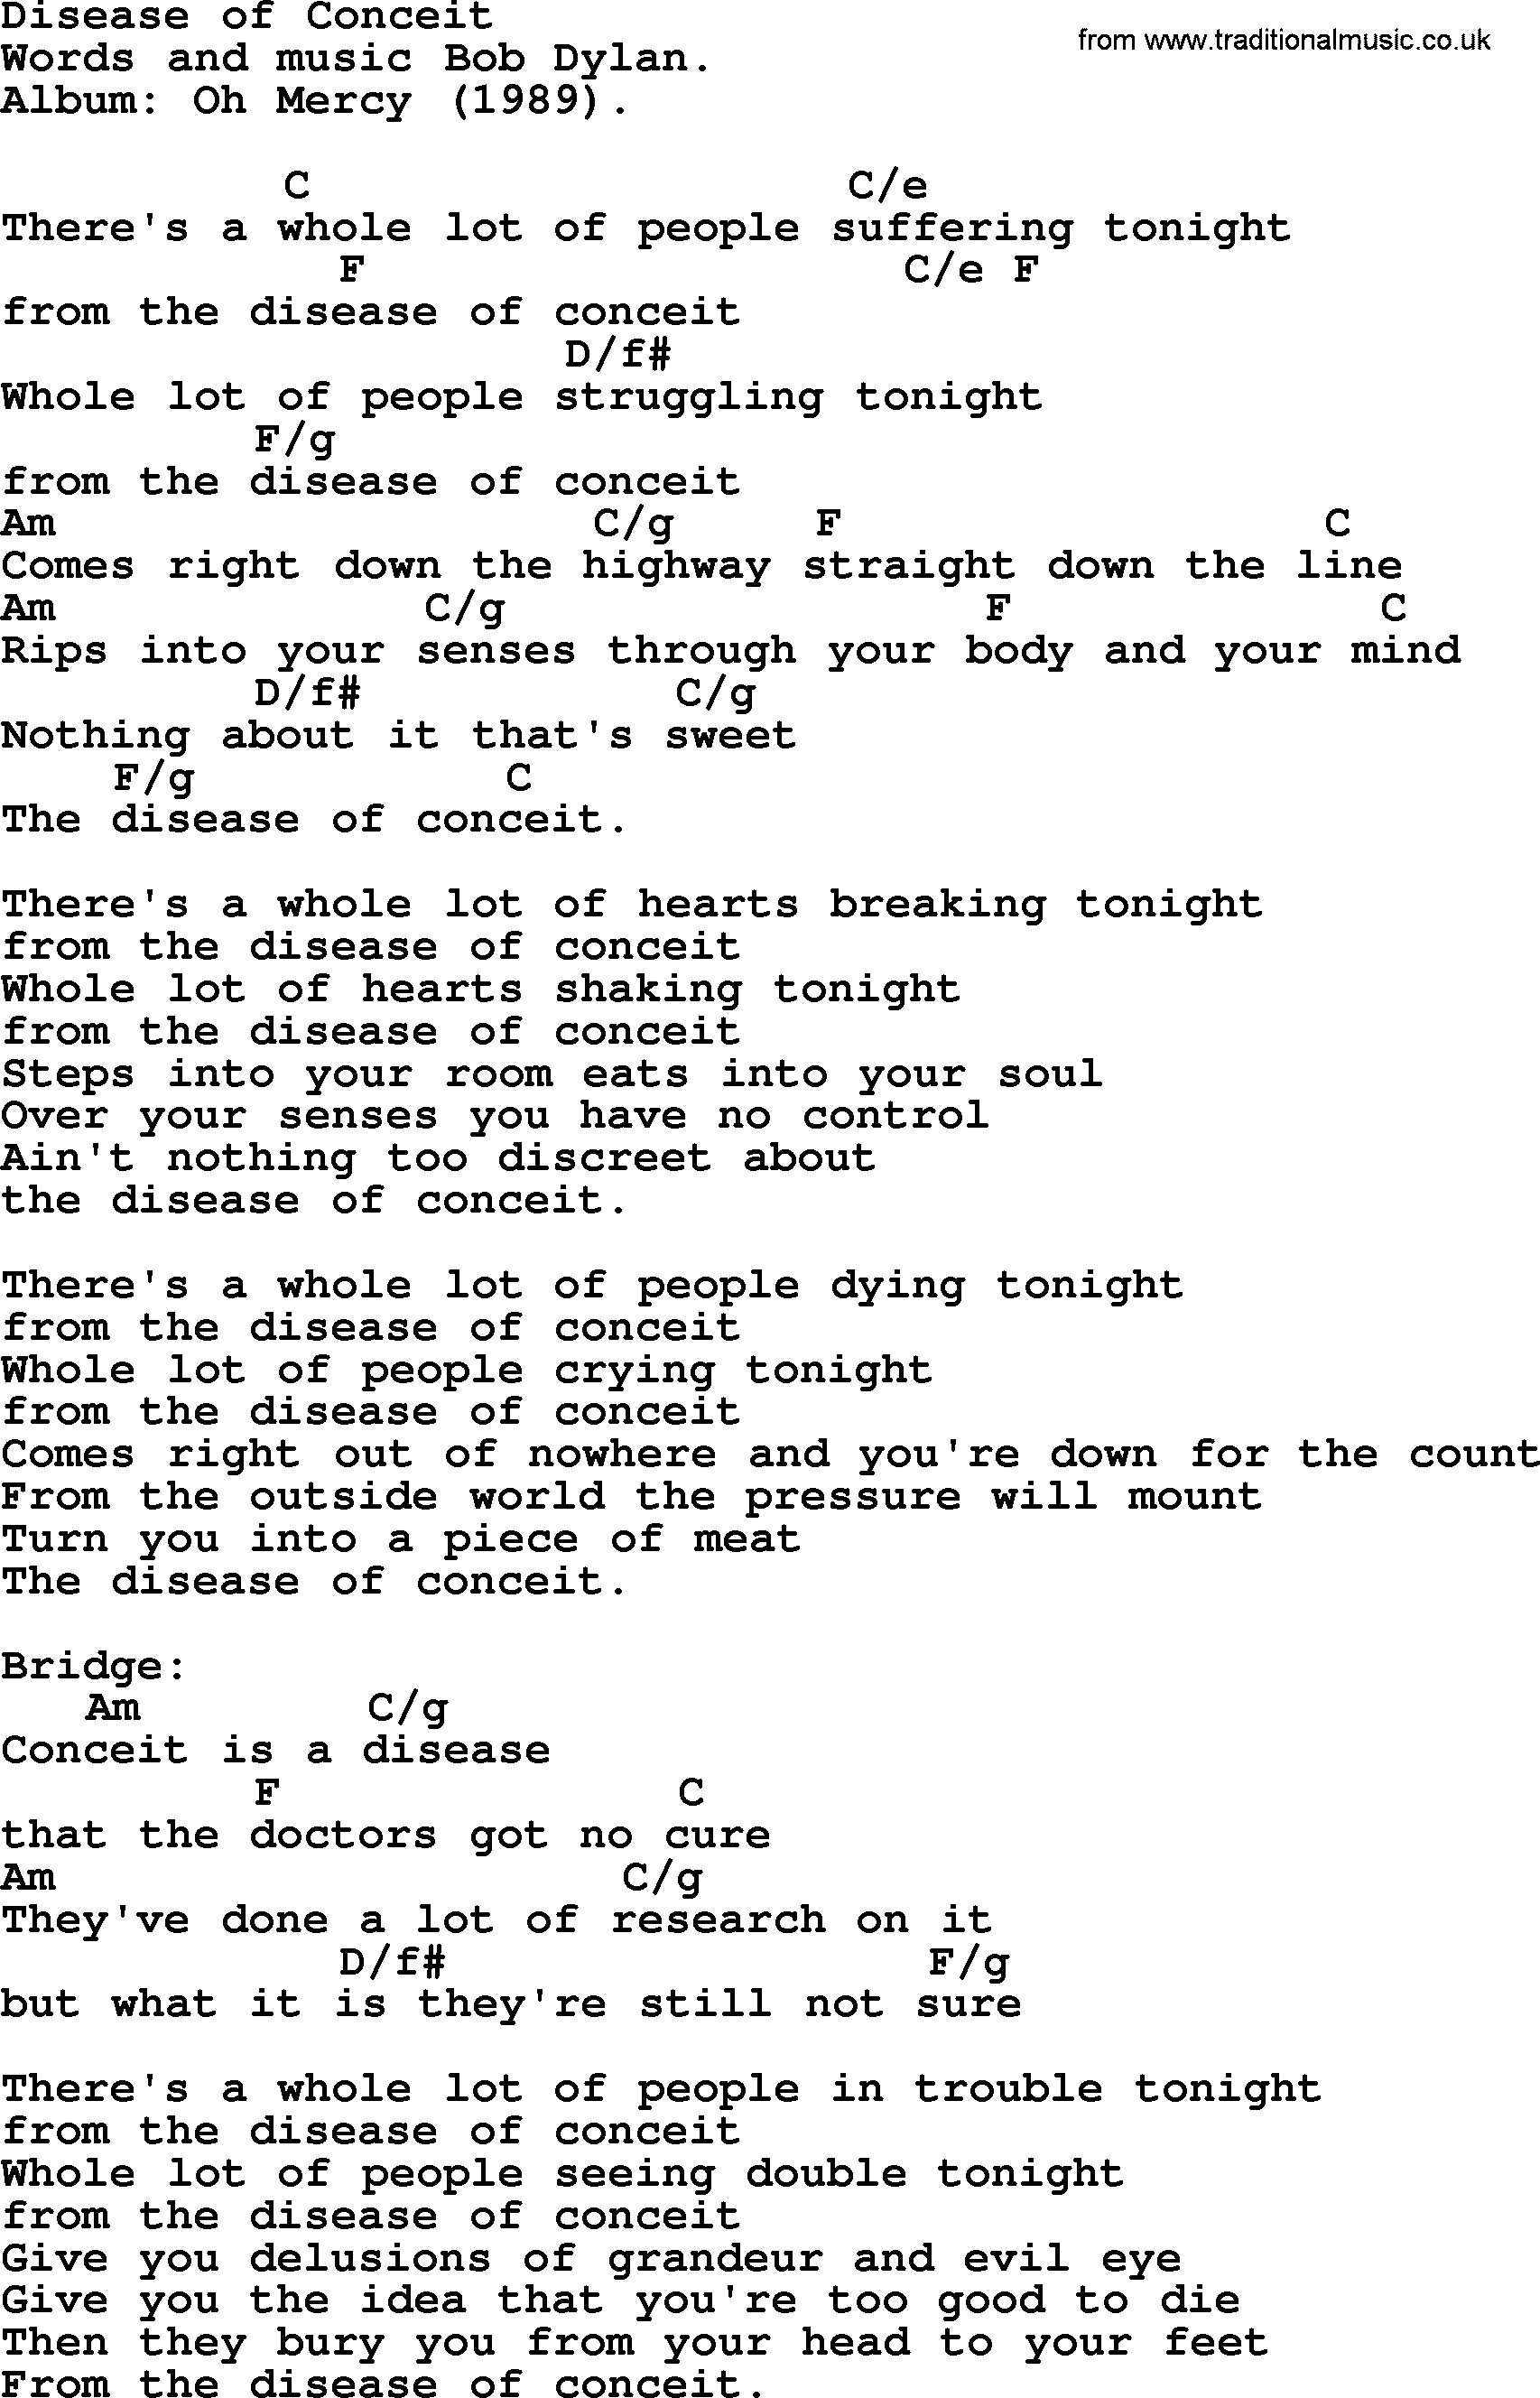 Bob Dylan song, lyrics with chords - Disease of Conceit